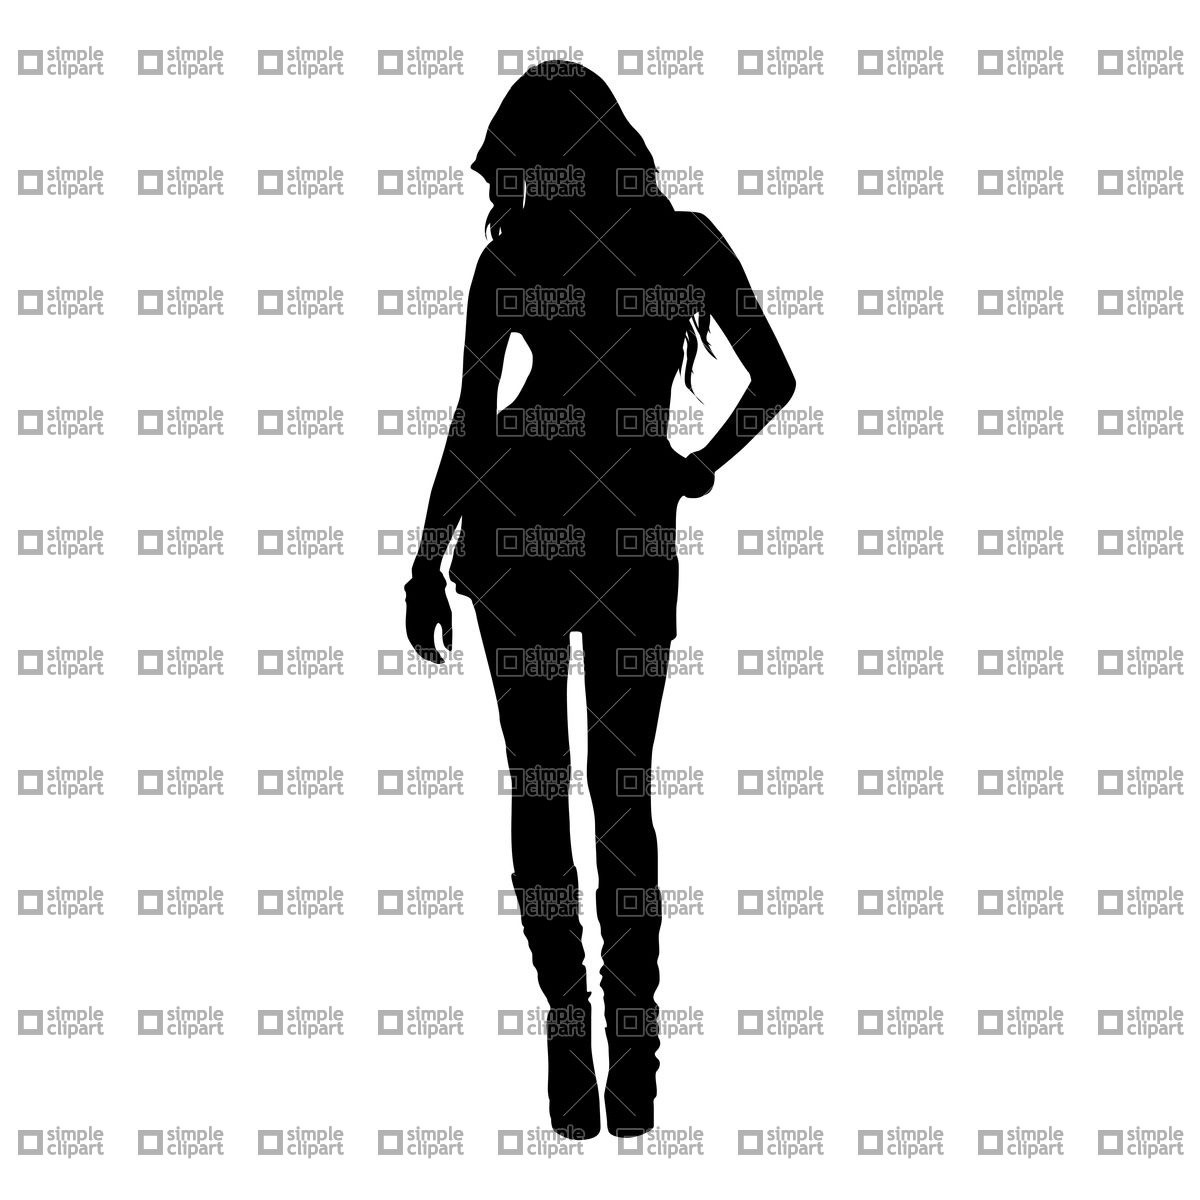 Clipart   People   Silhouette Of Beautiful Young Girl Vector Clipart